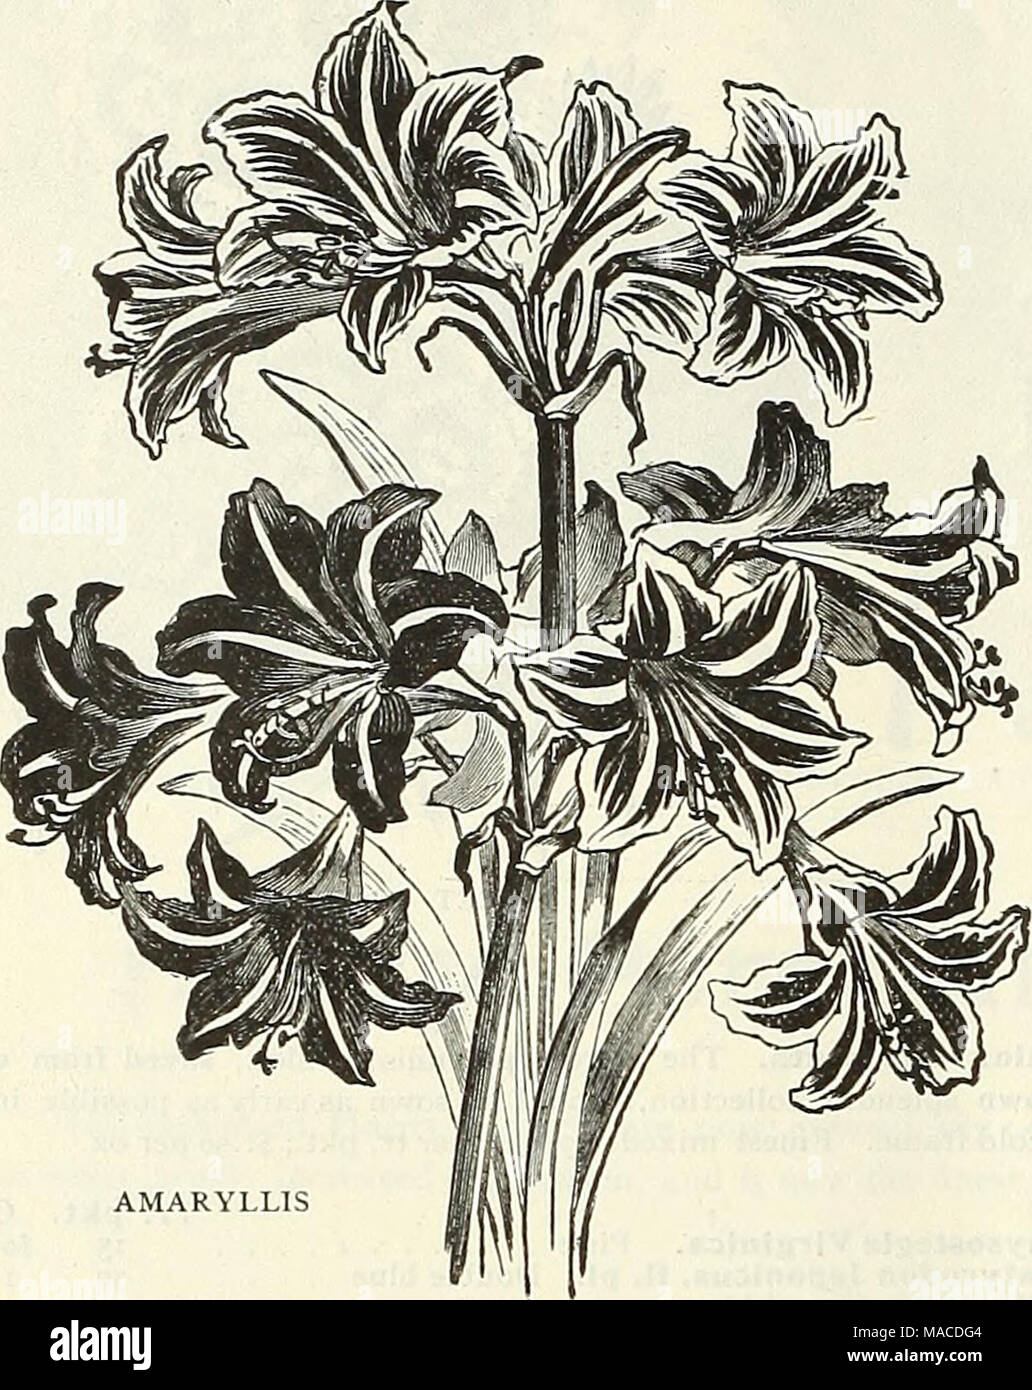 . Dreer's wholesale price list : seeds for florists plants vegetable seeds, tools, fertilizers, sundries, etc . AMARYLLIS Amaryllis. ] Burbank's Hybrids. We have secured from Mr. Luther Burbank, the eminent hybridizer, the entire stock of his magnificent hybrids. All large bulbs that will give immediate results Aulica Platypetala Defiance Equestre Formosissima ... $4.00 per 100 Johnsonii. Extra large strong hills - $25.00 per ioo Prince of Orange Soiandriflora conspicua Vitatta Hybrids ch Per doz. 5° 15 00 SO 5 00 40 4 00 10 1 00 °5 50 30 3 5° 40 4 00 5° 5 00 3° 3 00 Amorphophallus. Rivieri. S Stock Photo